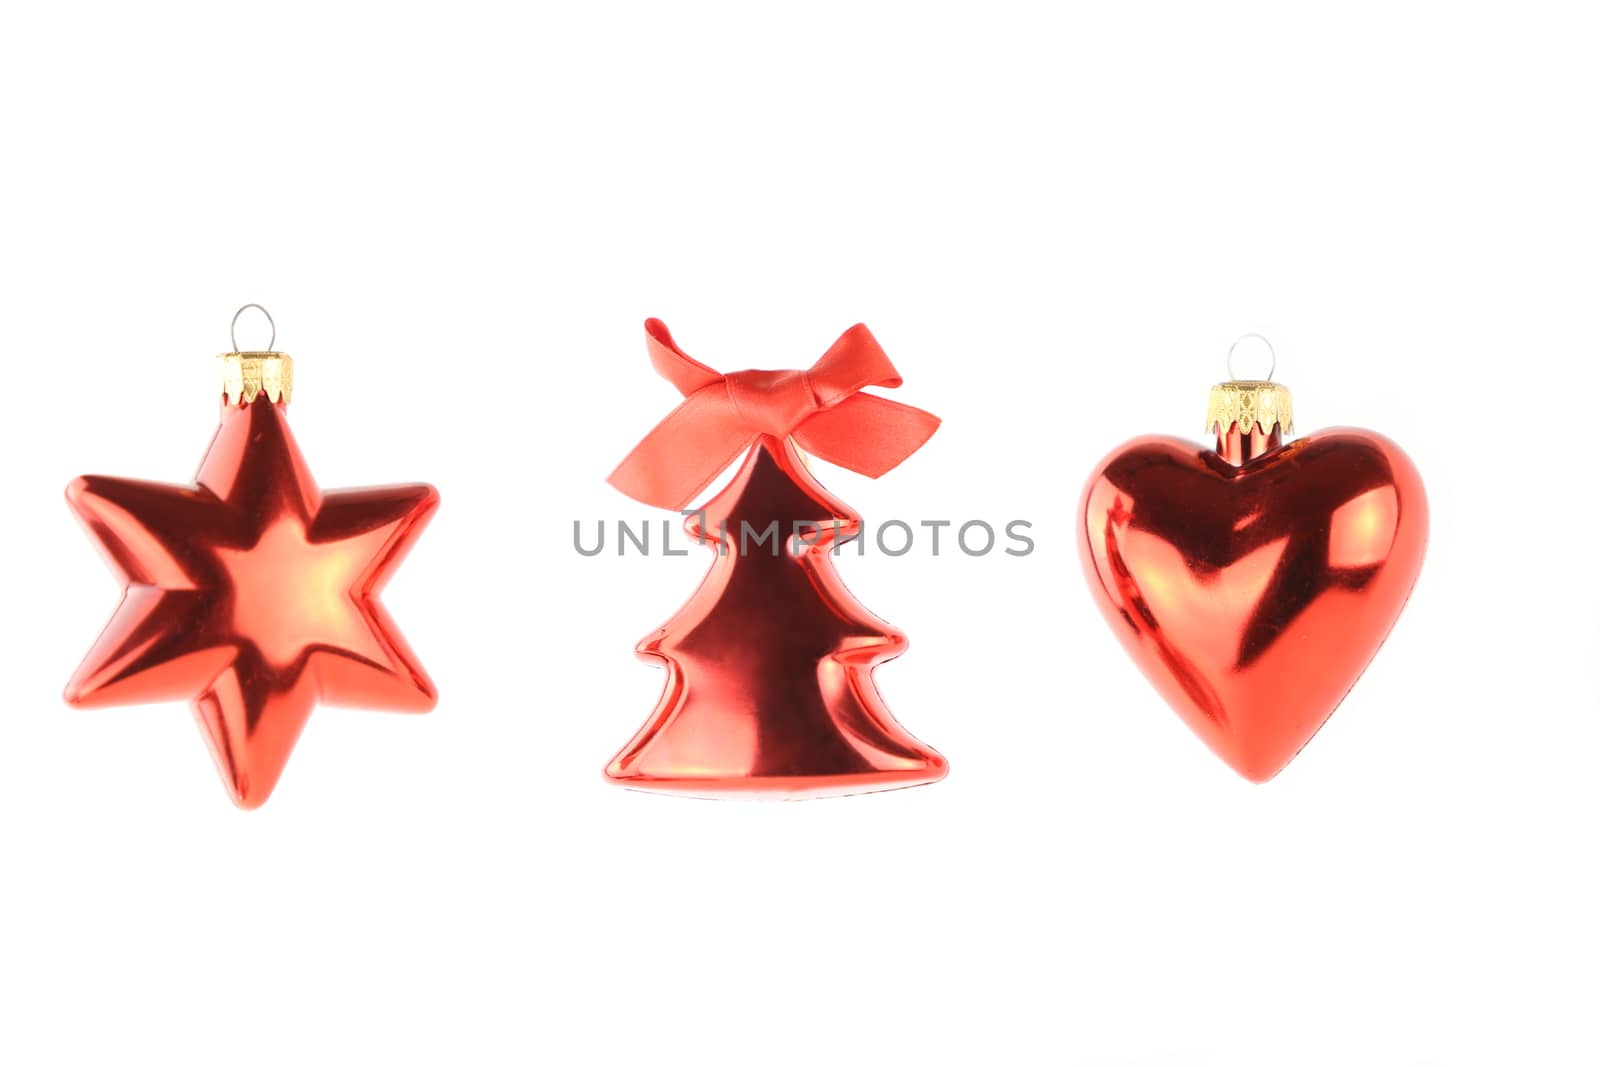 Three hanging red Christmas balls isolated having different shapes: star, heart and tree on white background